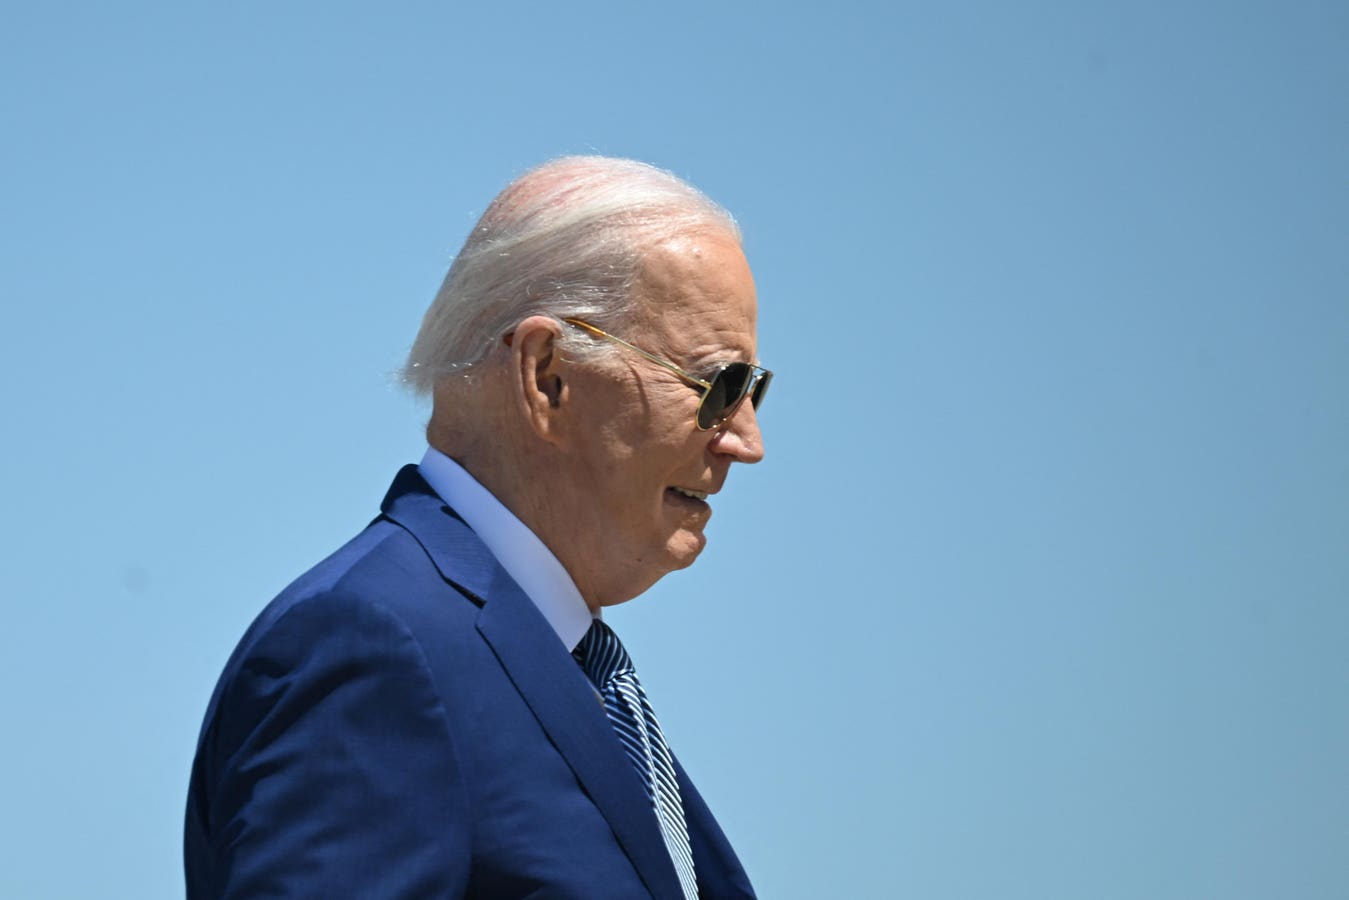 Biden Vs. Trump 2024 Election Polls: Trump Leads By 1 Point In Latest Survey, Days Before Debate